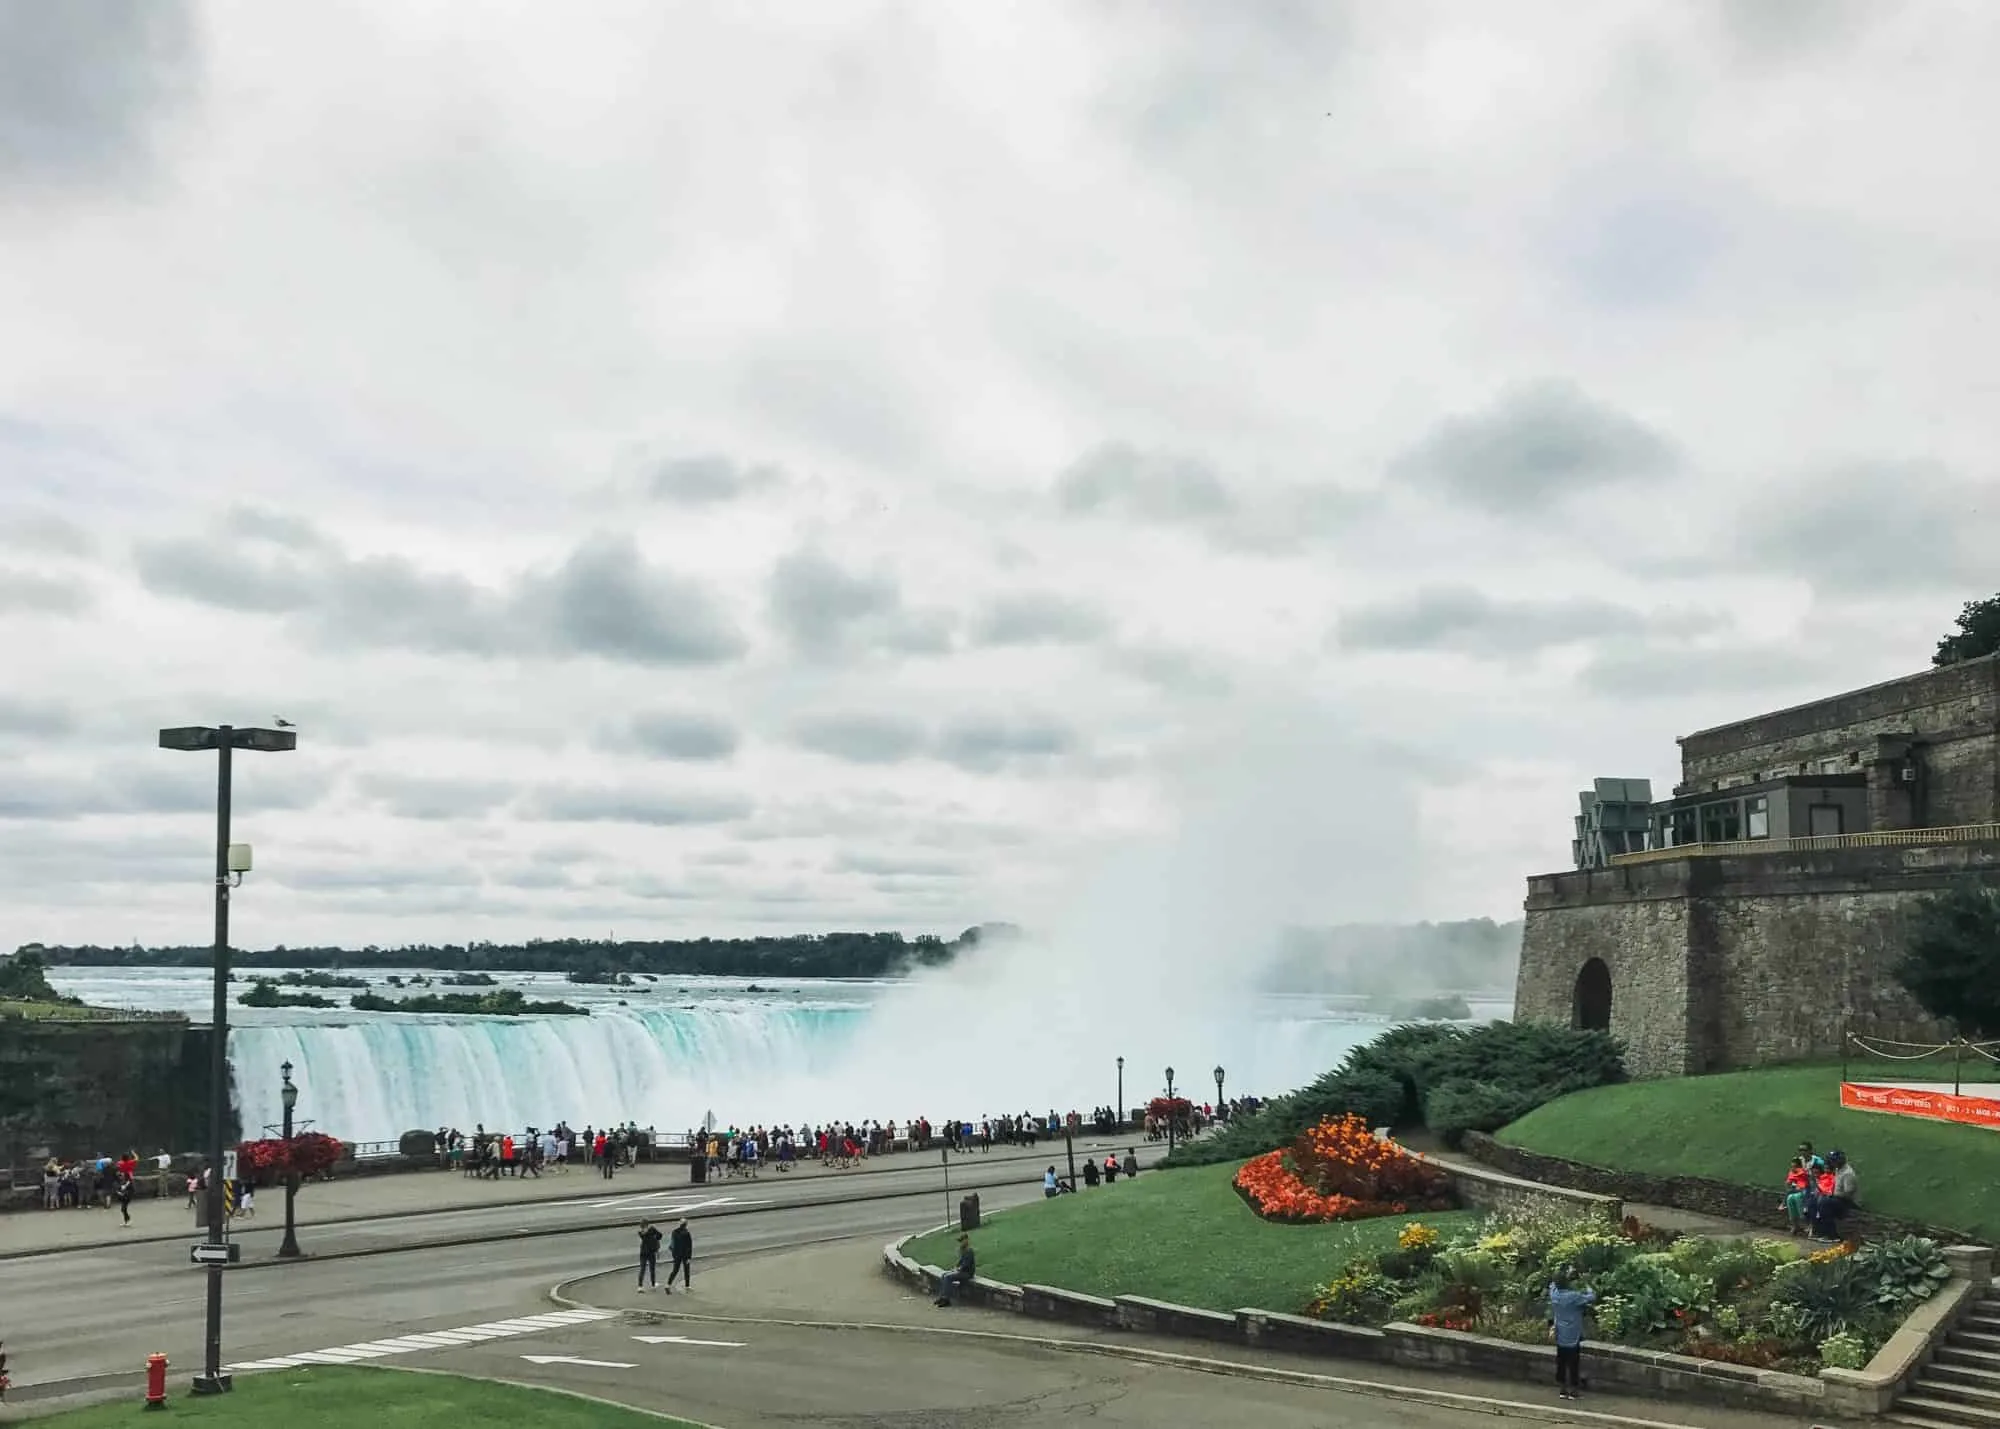 How to spend a perfect day trip in Niagara Falls, Ontario | guide to spending a day at Niagara Falls on the Canadian side | summer road trip ideas near Toronto | Diary of a Toronto Girl, a Canadian lifestyle blog